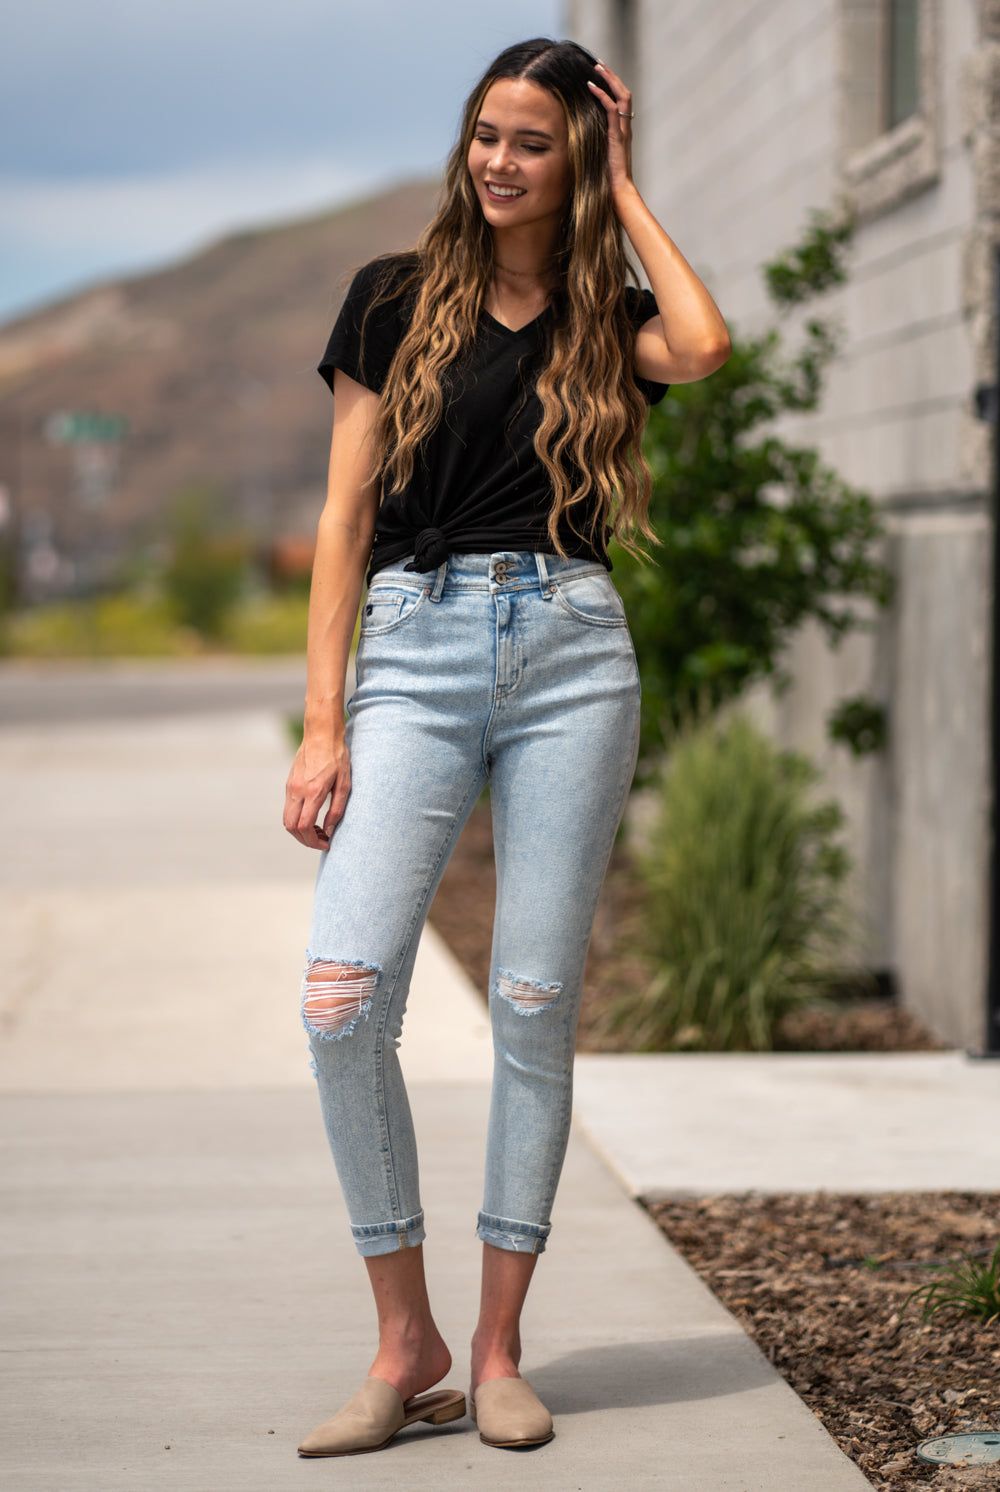 Kan Can Jeans  Collection: Summer 2020 Color: Acid Wash Cut: Ankle Skinny, 26" Inseam  Rise: High Rise, 10.5" Front Rise Stitching: Classic Fly: Zipper Style #: KC8594L